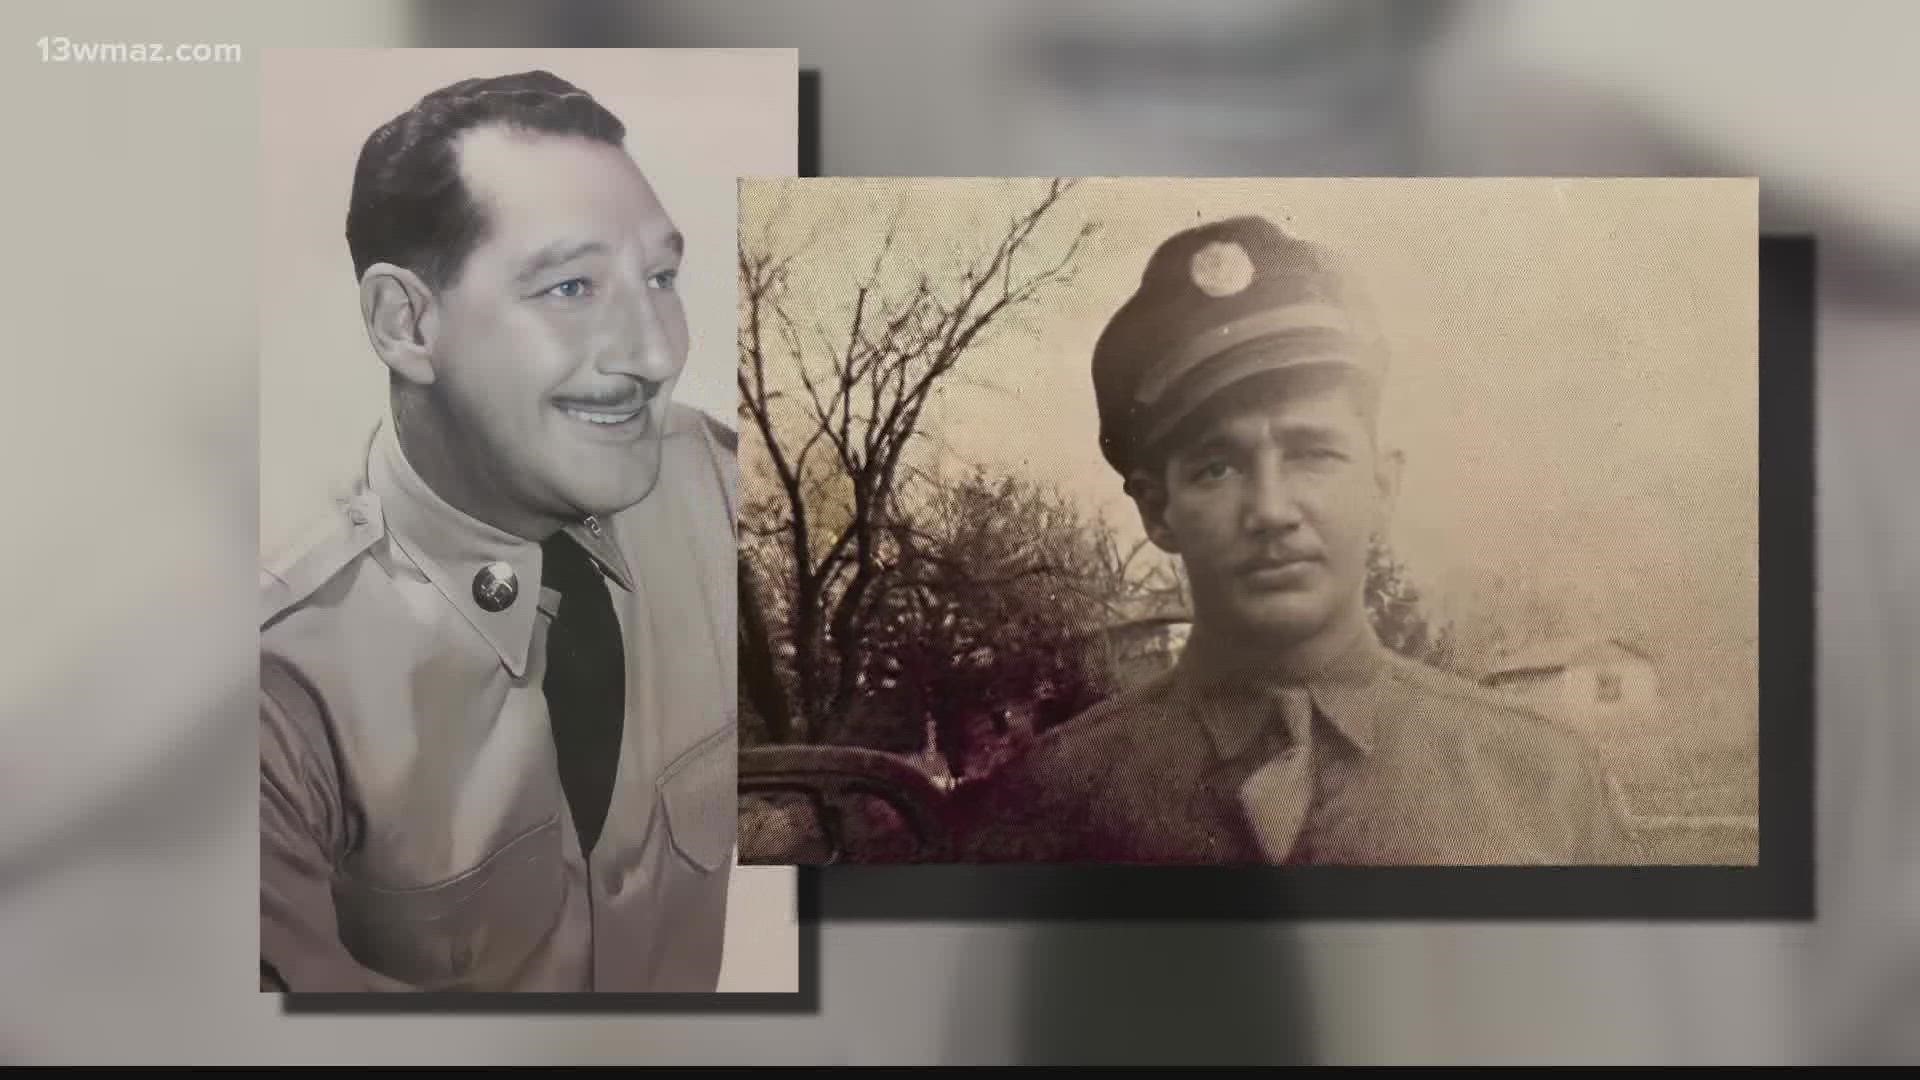 The VFW Post in Perry found original World War II documents, including a signed citation from Lieutenant General George Patton, and returned them to the man's family